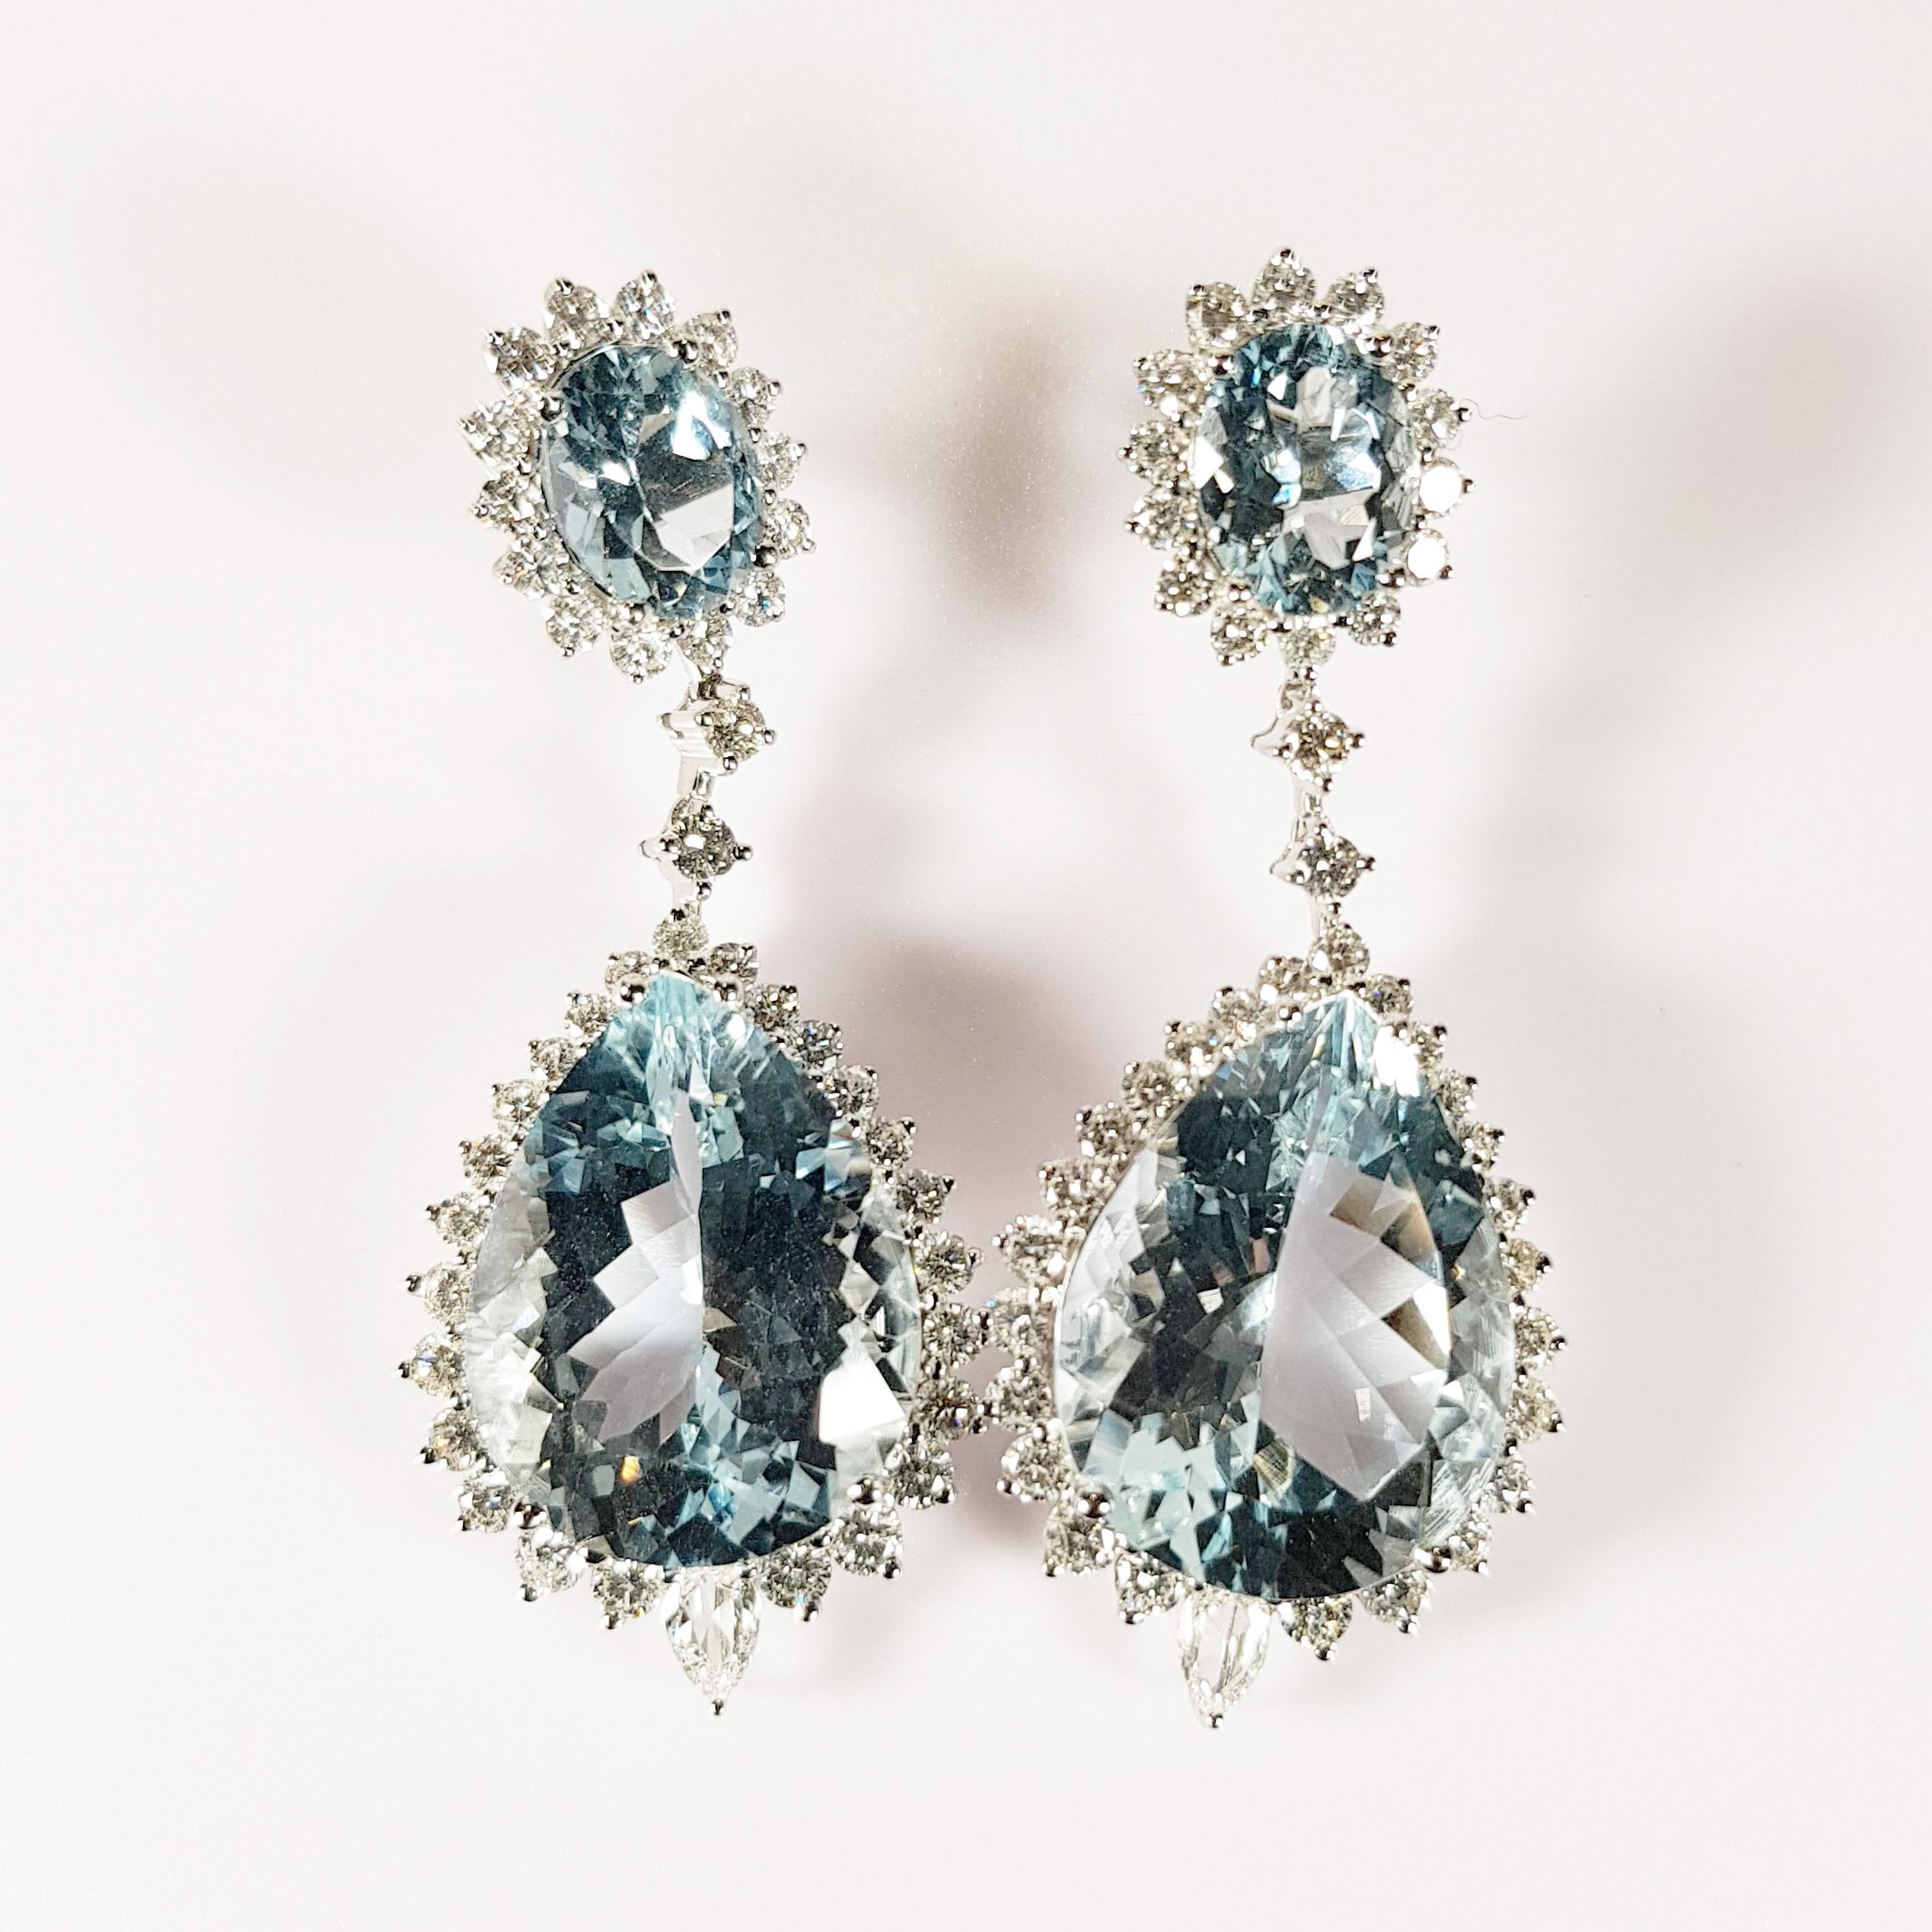 Contemporary 18 Karat White Gold Earrings with Diamonds and Aquamarine For Sale